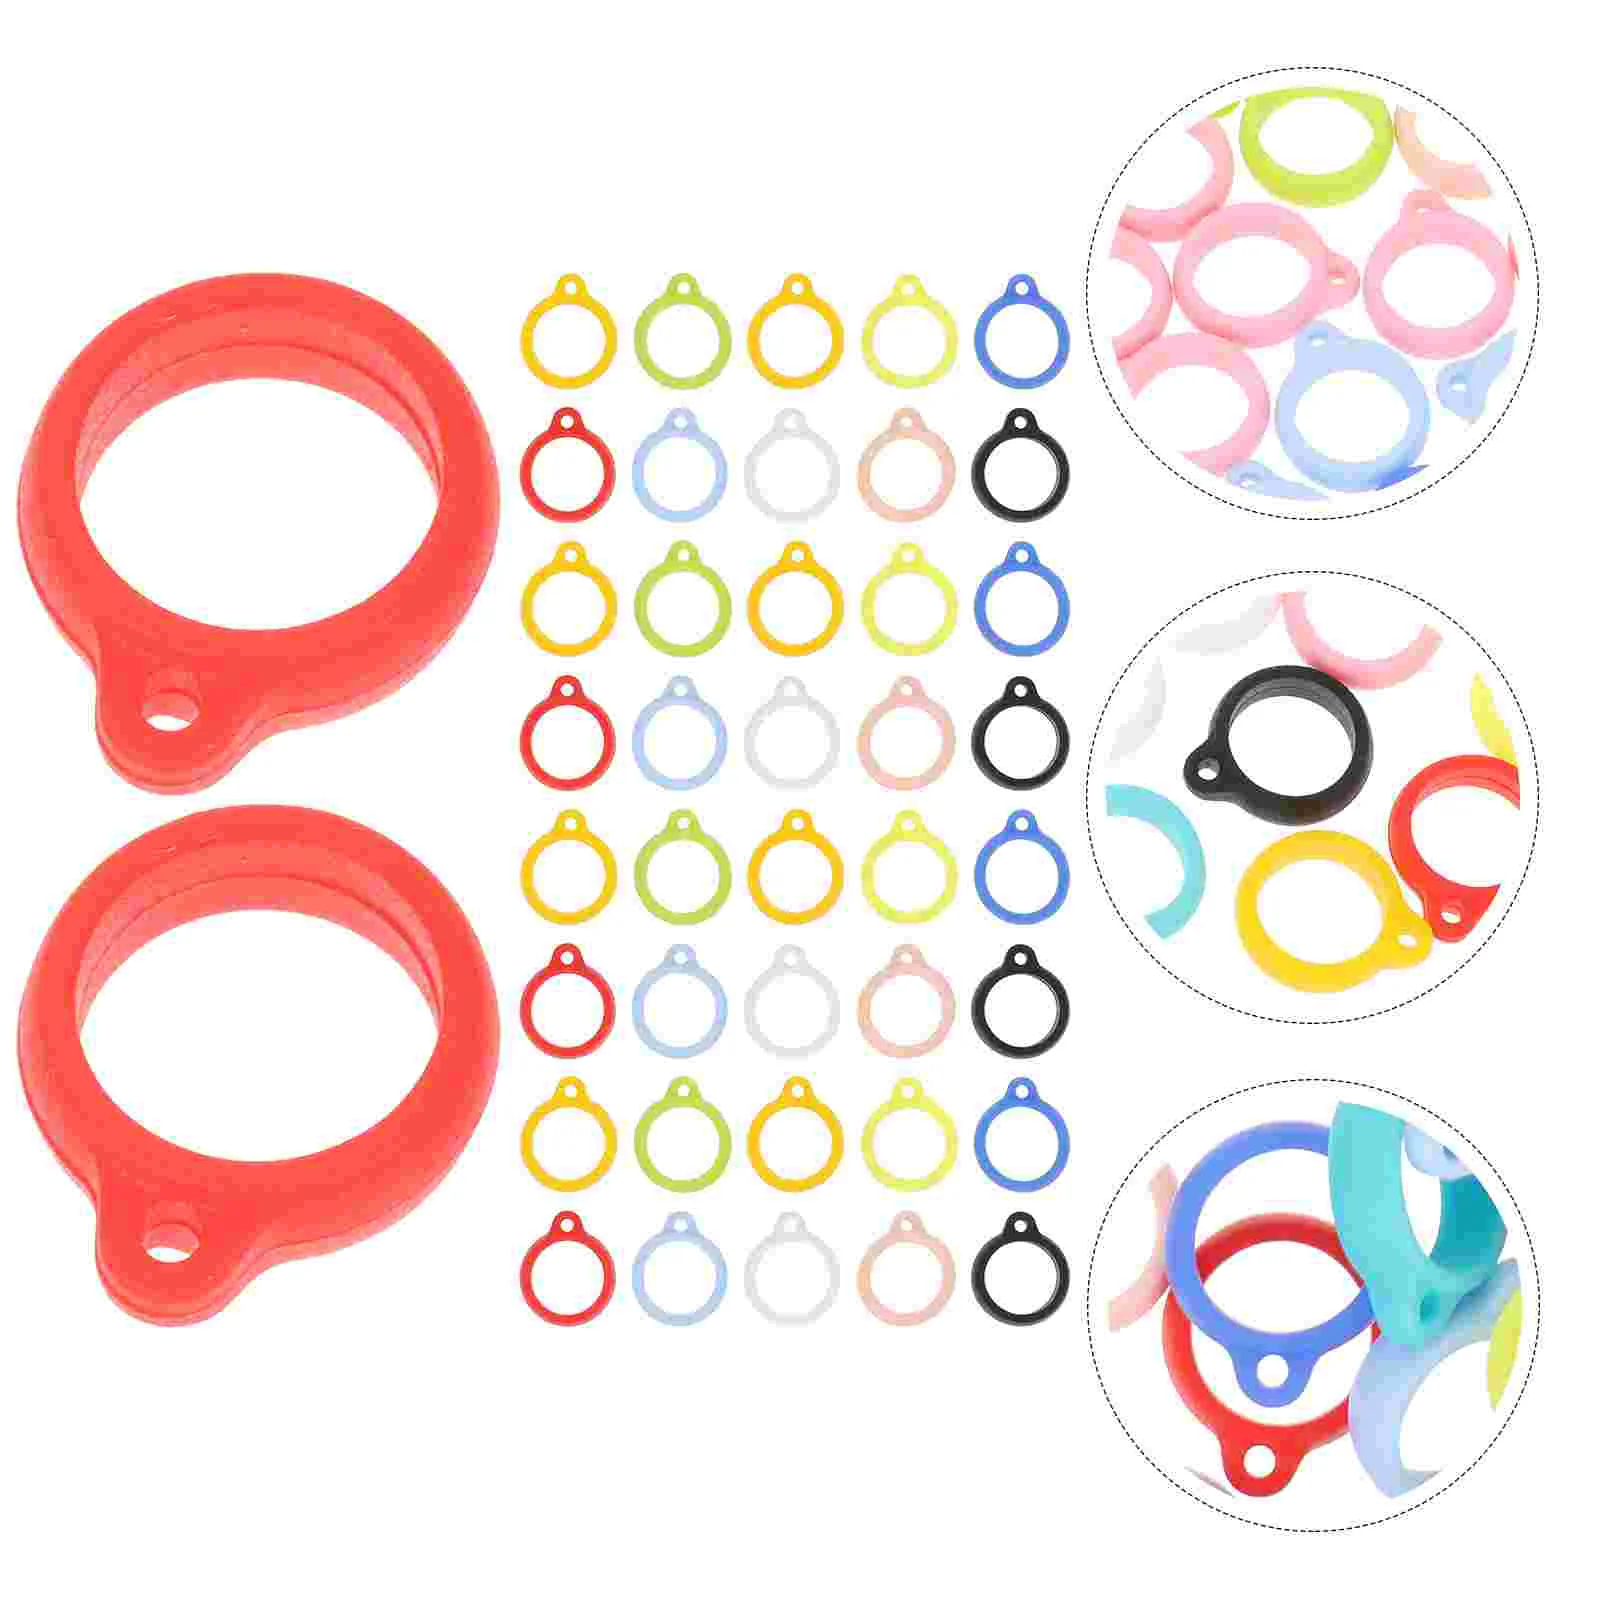 

50 Pcs Coloured Lanyards Keyring Charms Finger Rings Mobile Phone Decors Silica Gel Anti-lost Gadget Cell Man Ropes